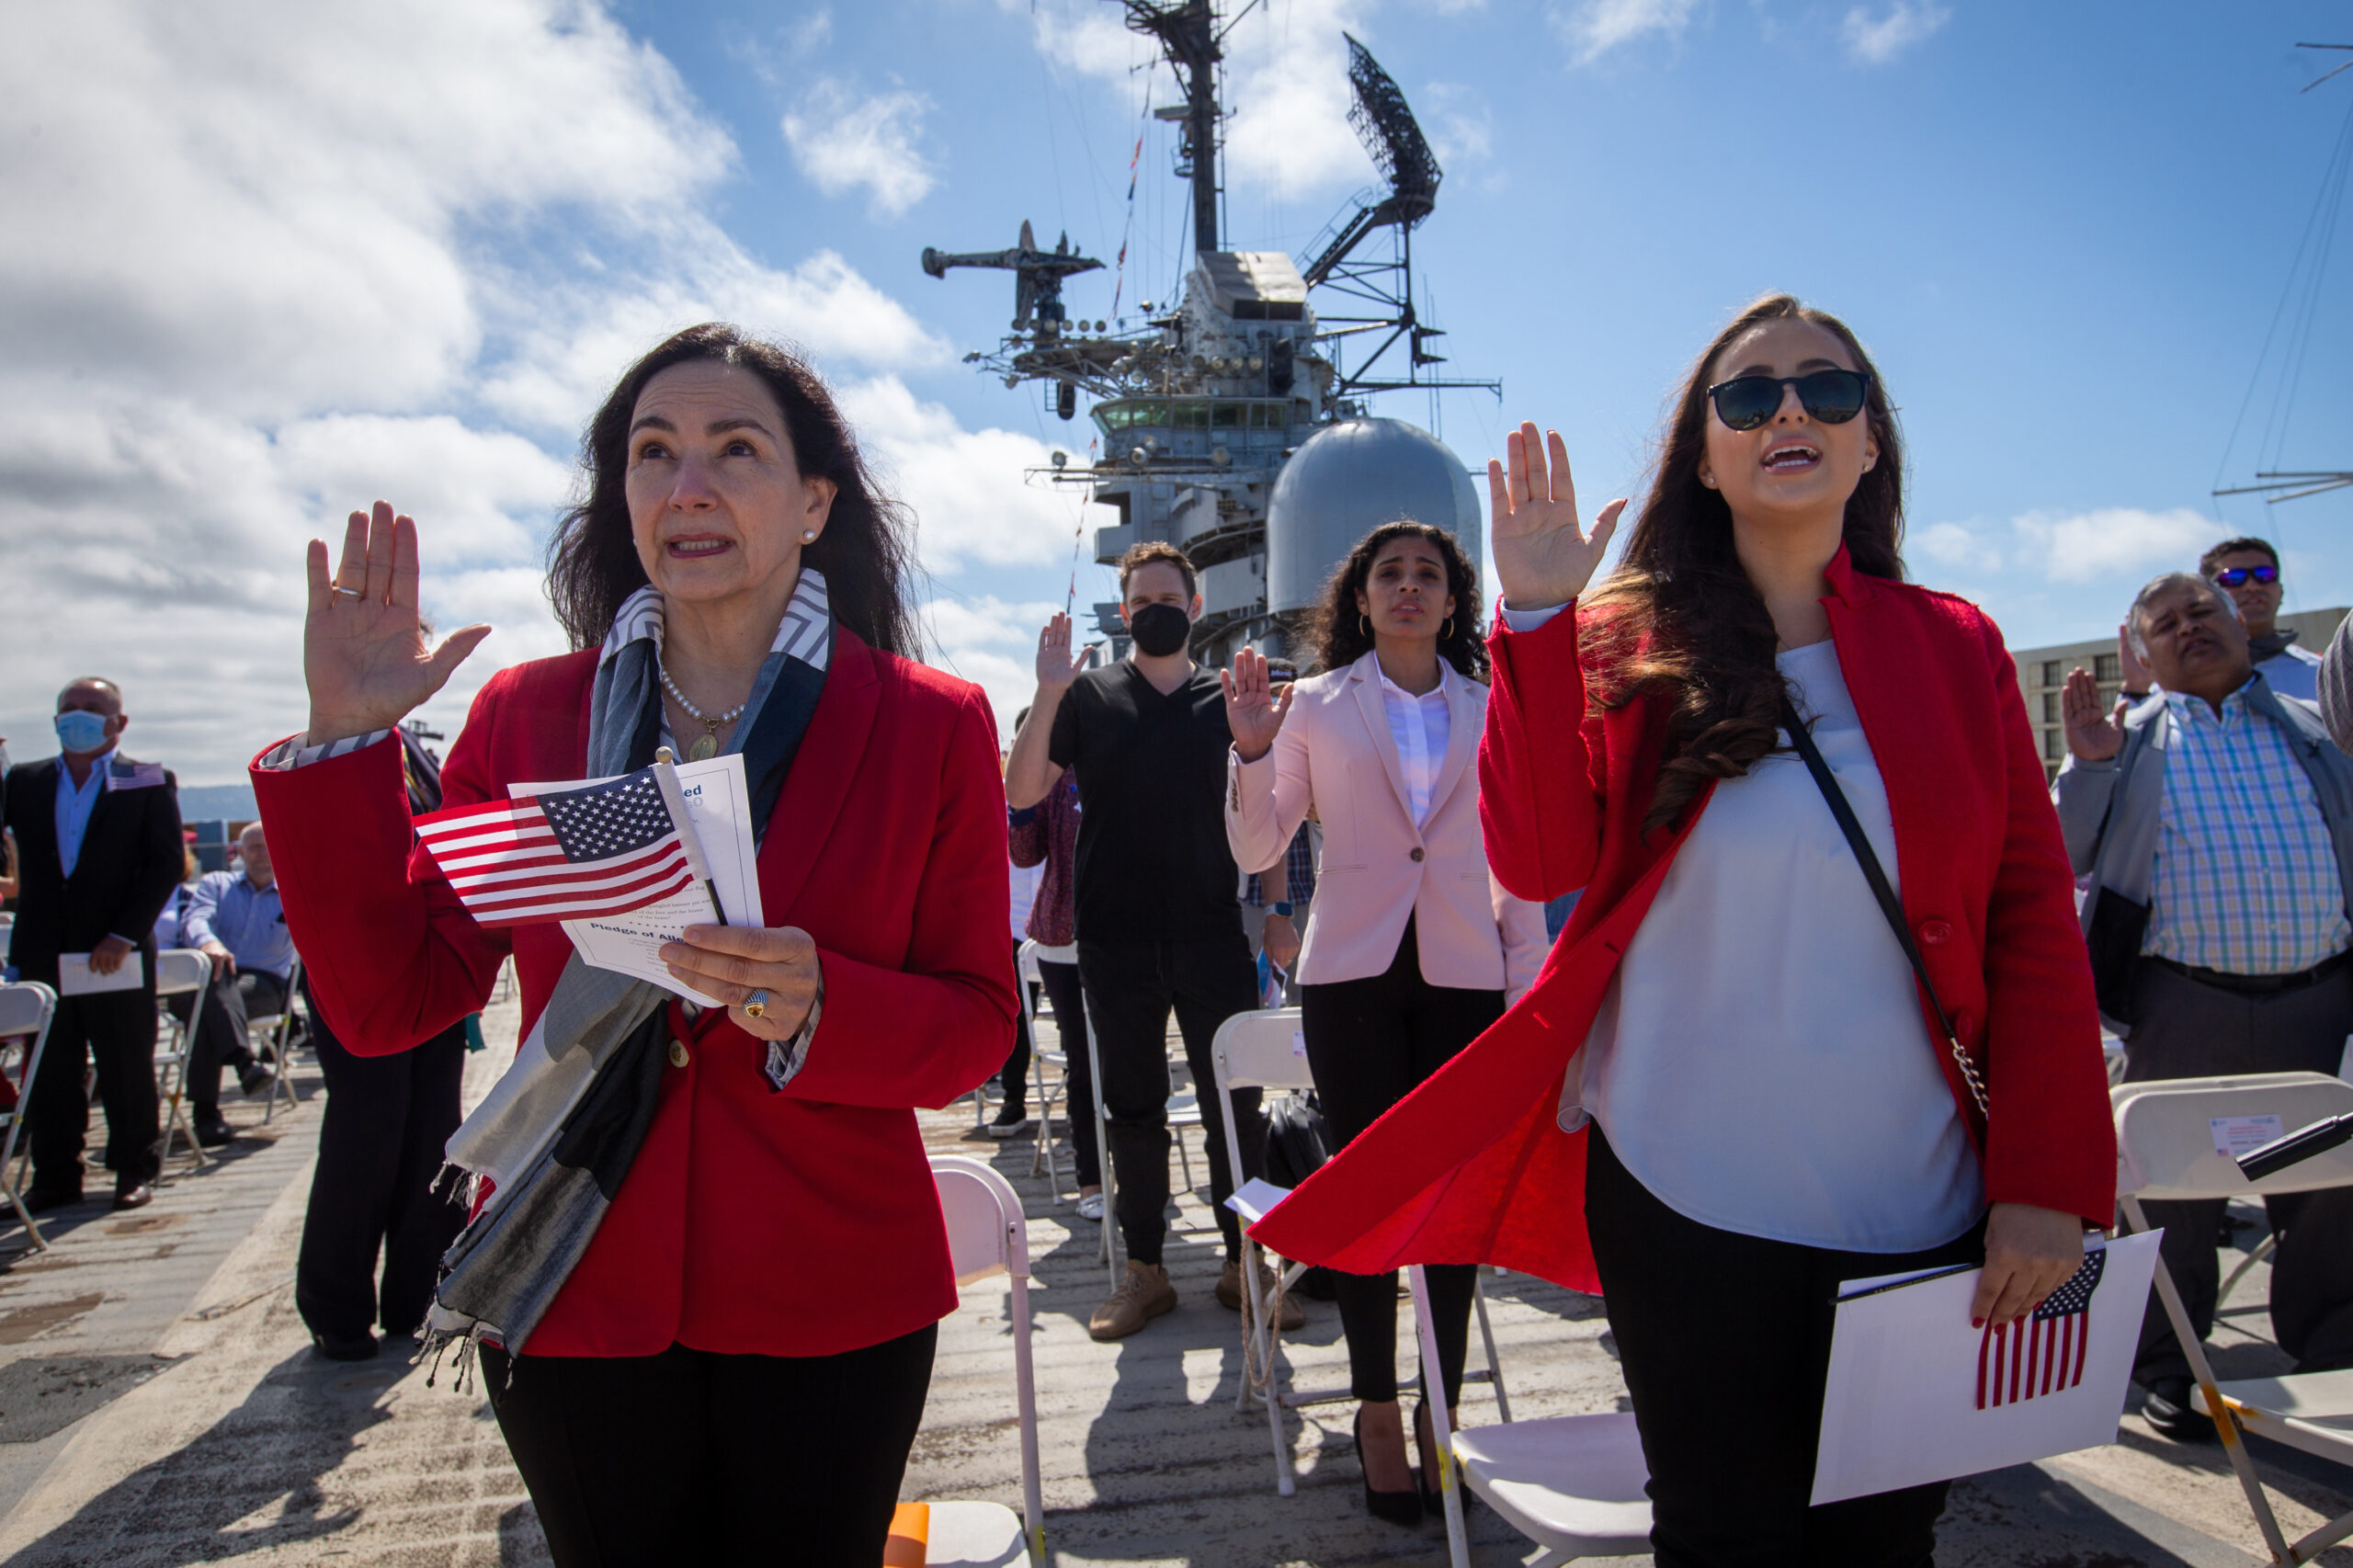 Maria Laura Limpias Chavez, left, of Bolivia, Sahara Loffsner, of Colombia, and fellow new American citizens, take the Oath of Allegiance during a naturalization ceremony on the flight deck of the USS Hornet Museum in Alameda in July 2021. | Ray Chavez/MediaNews Group/The Mercury News via Getty Images